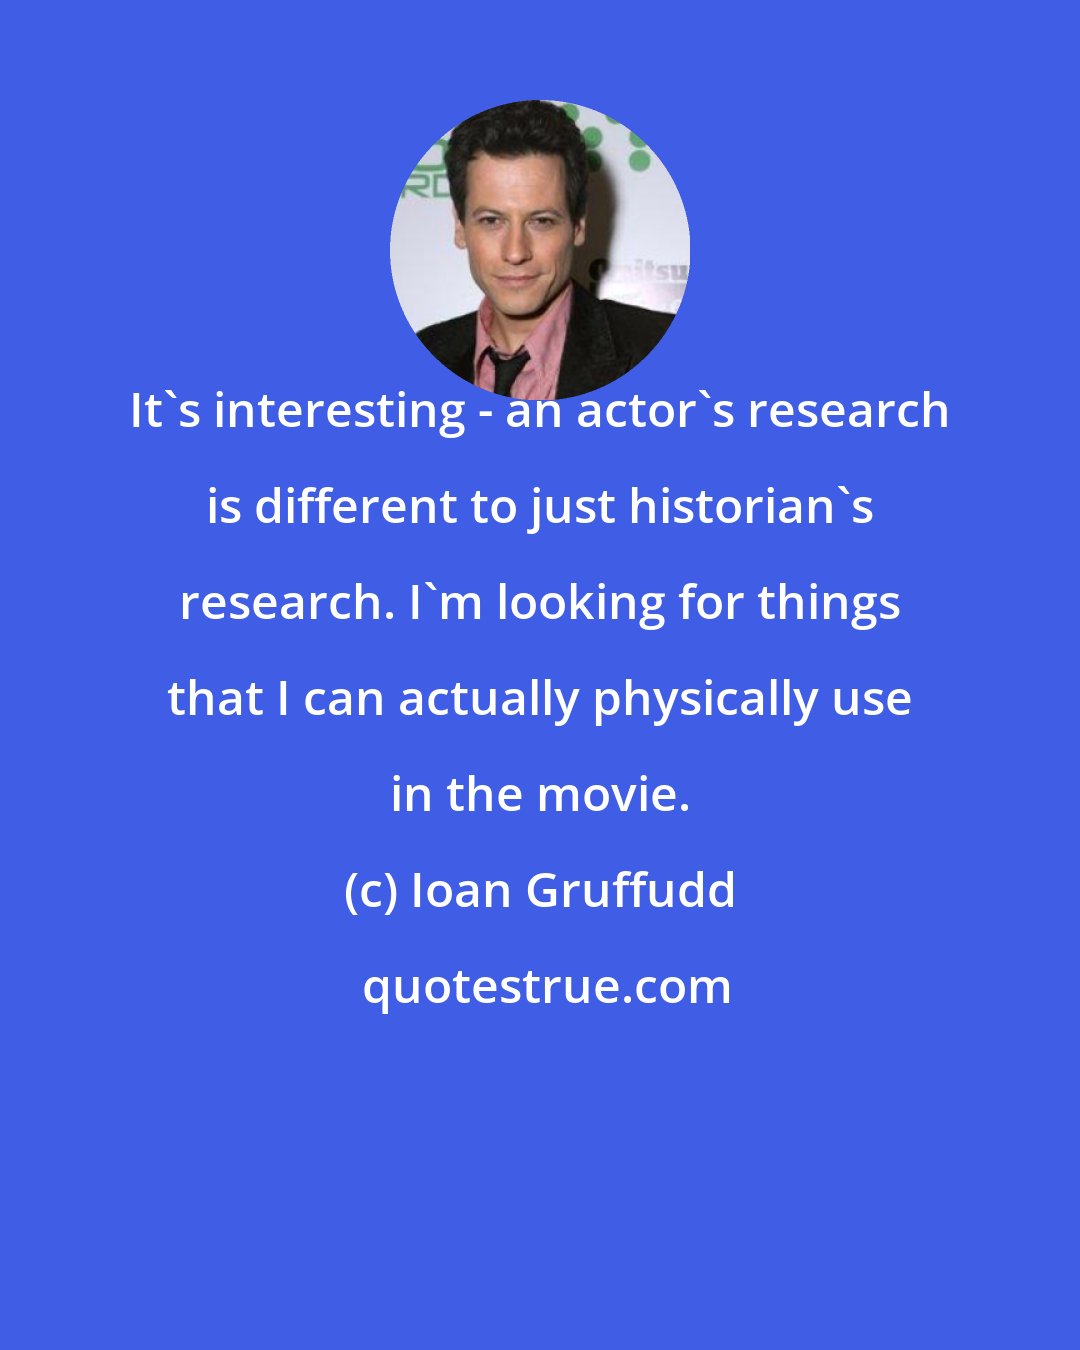 Ioan Gruffudd: It's interesting - an actor's research is different to just historian's research. I'm looking for things that I can actually physically use in the movie.